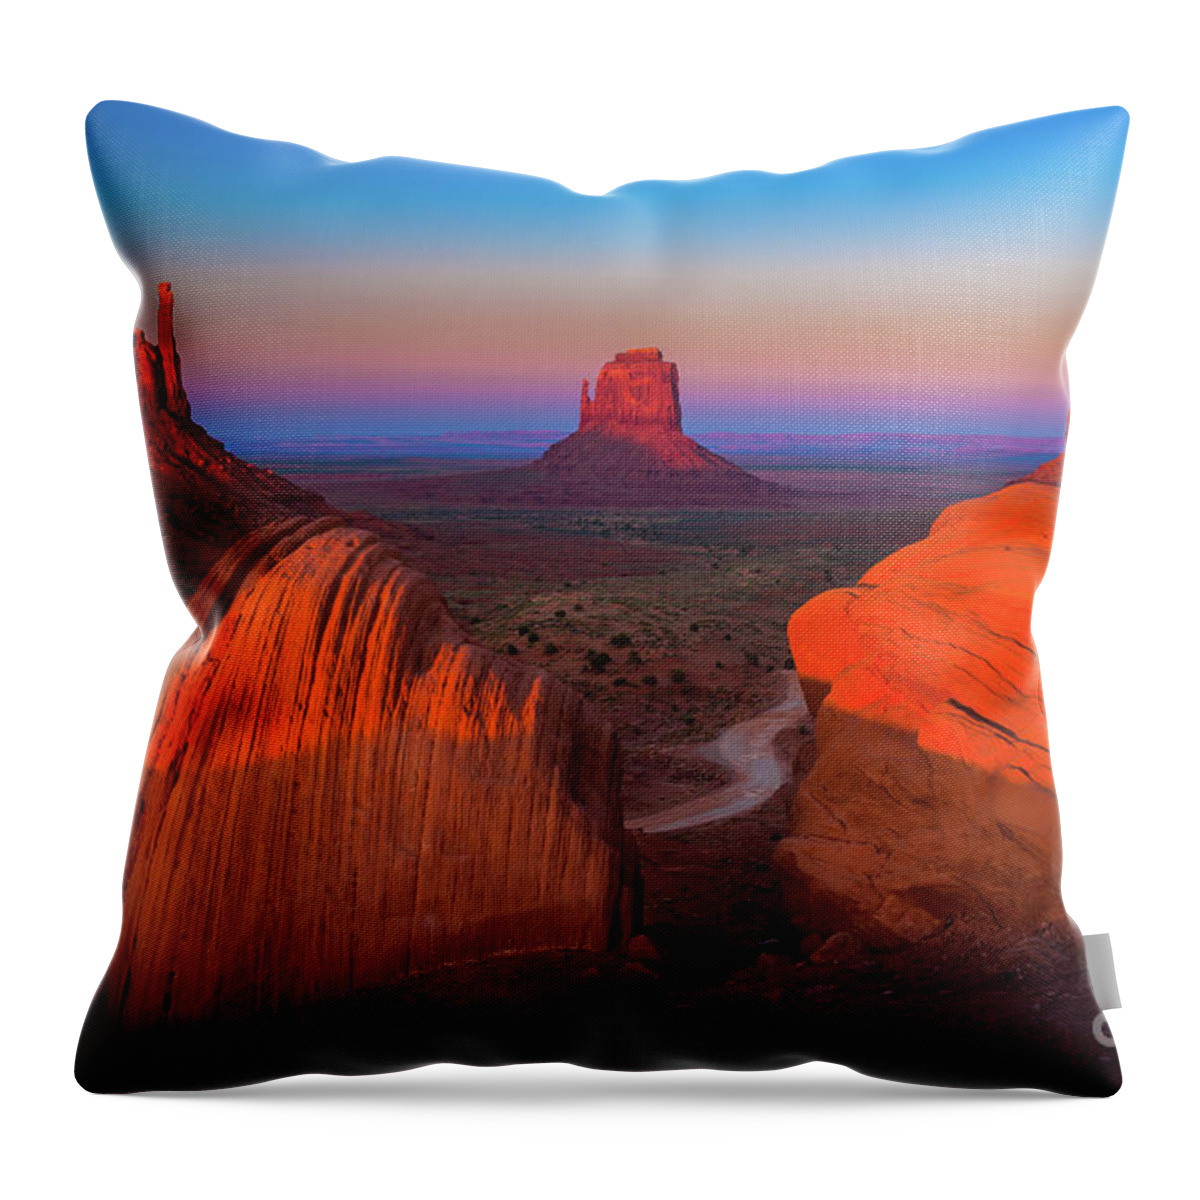 America Throw Pillow featuring the photograph The Mittens by Inge Johnsson